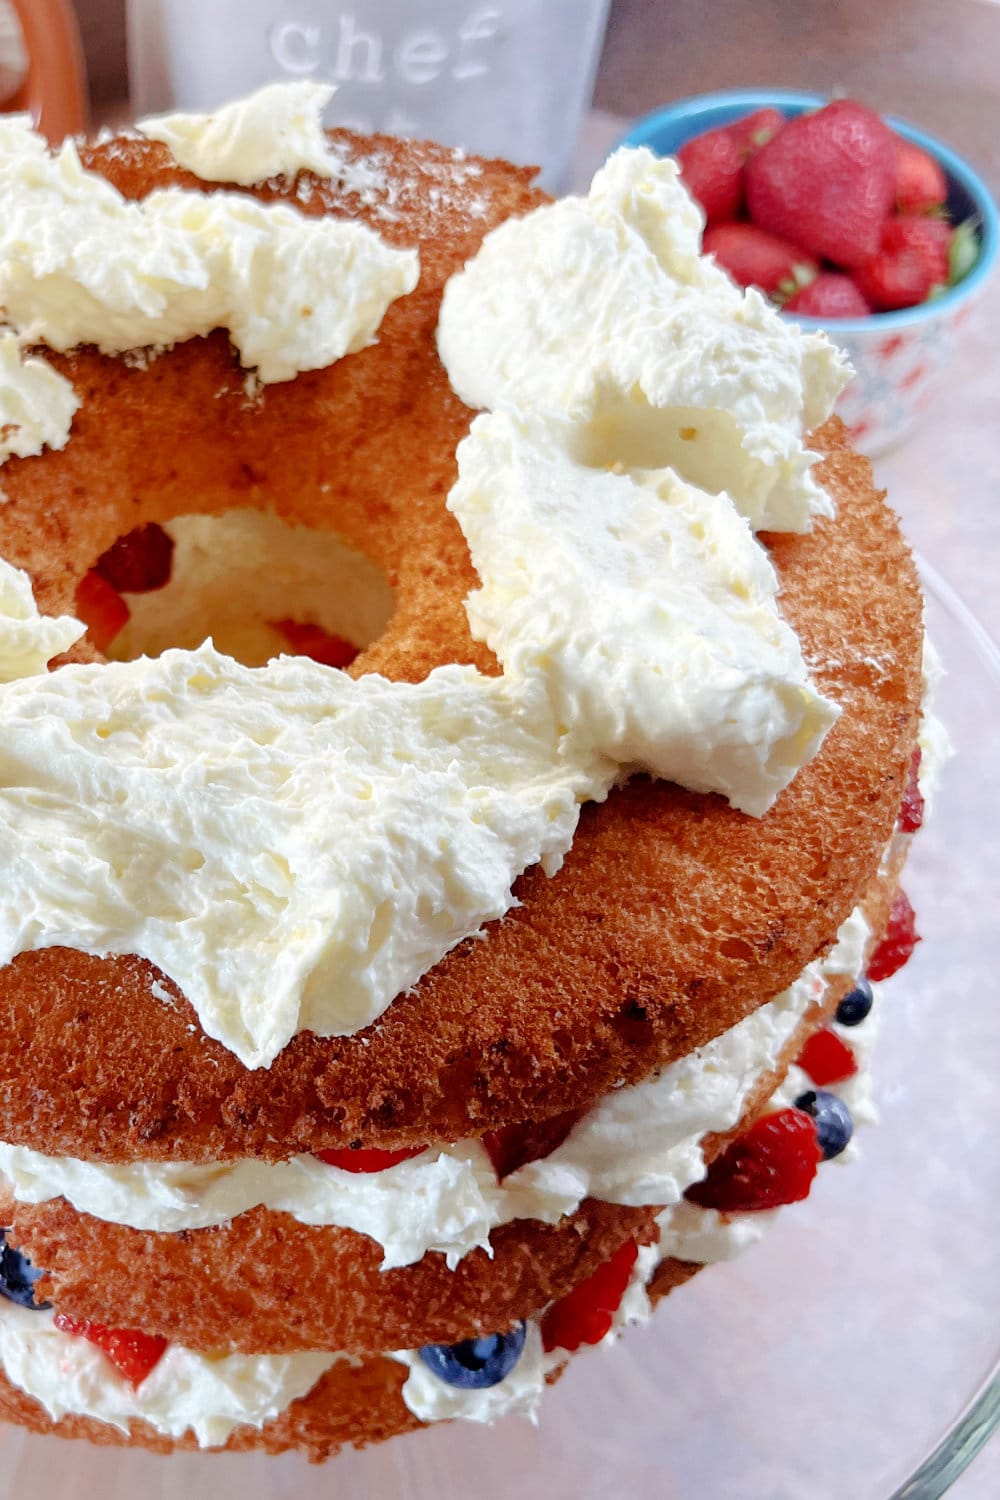 Dollops of the lemon cloud filling on the second layer of angel food cake.